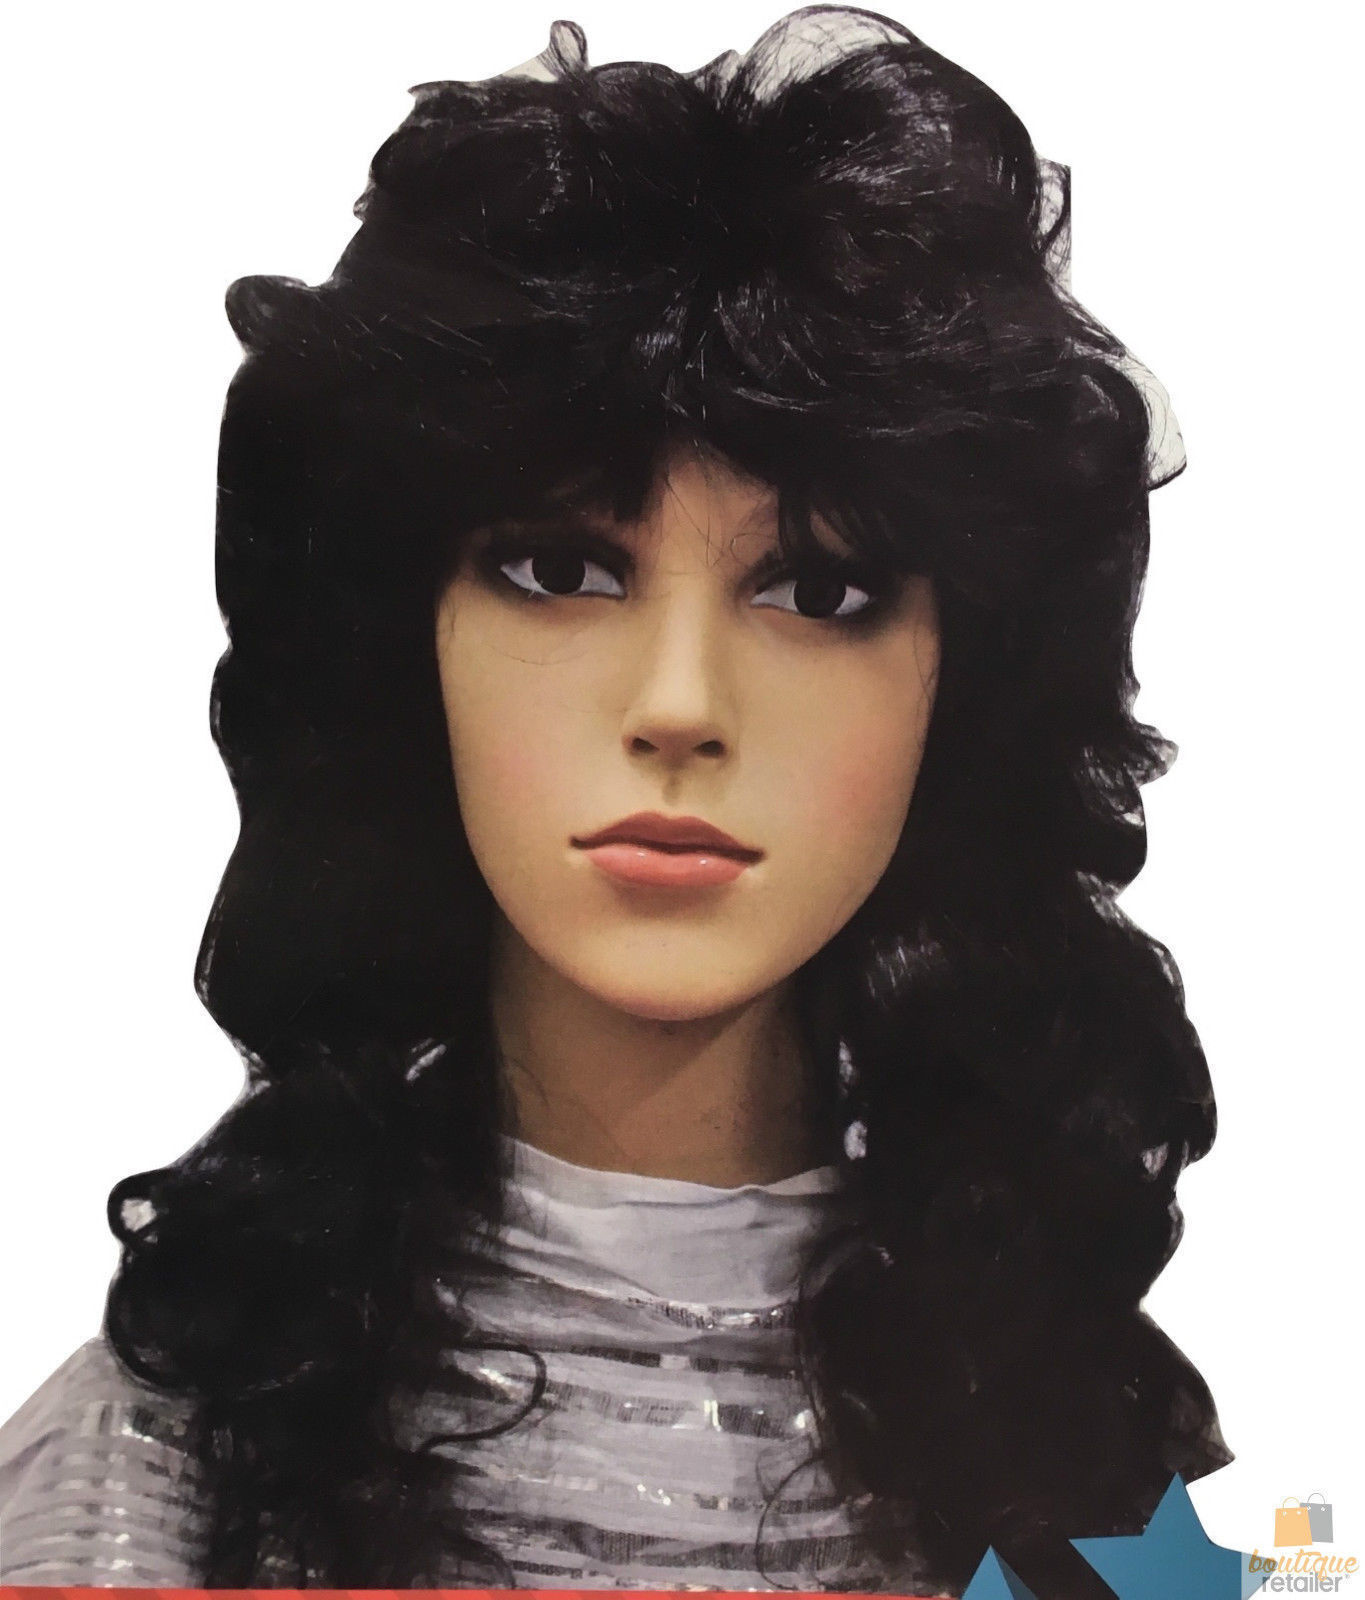 Retro Wig Curly Long Hair Disco Punk Rock Party Costume 60s 70s